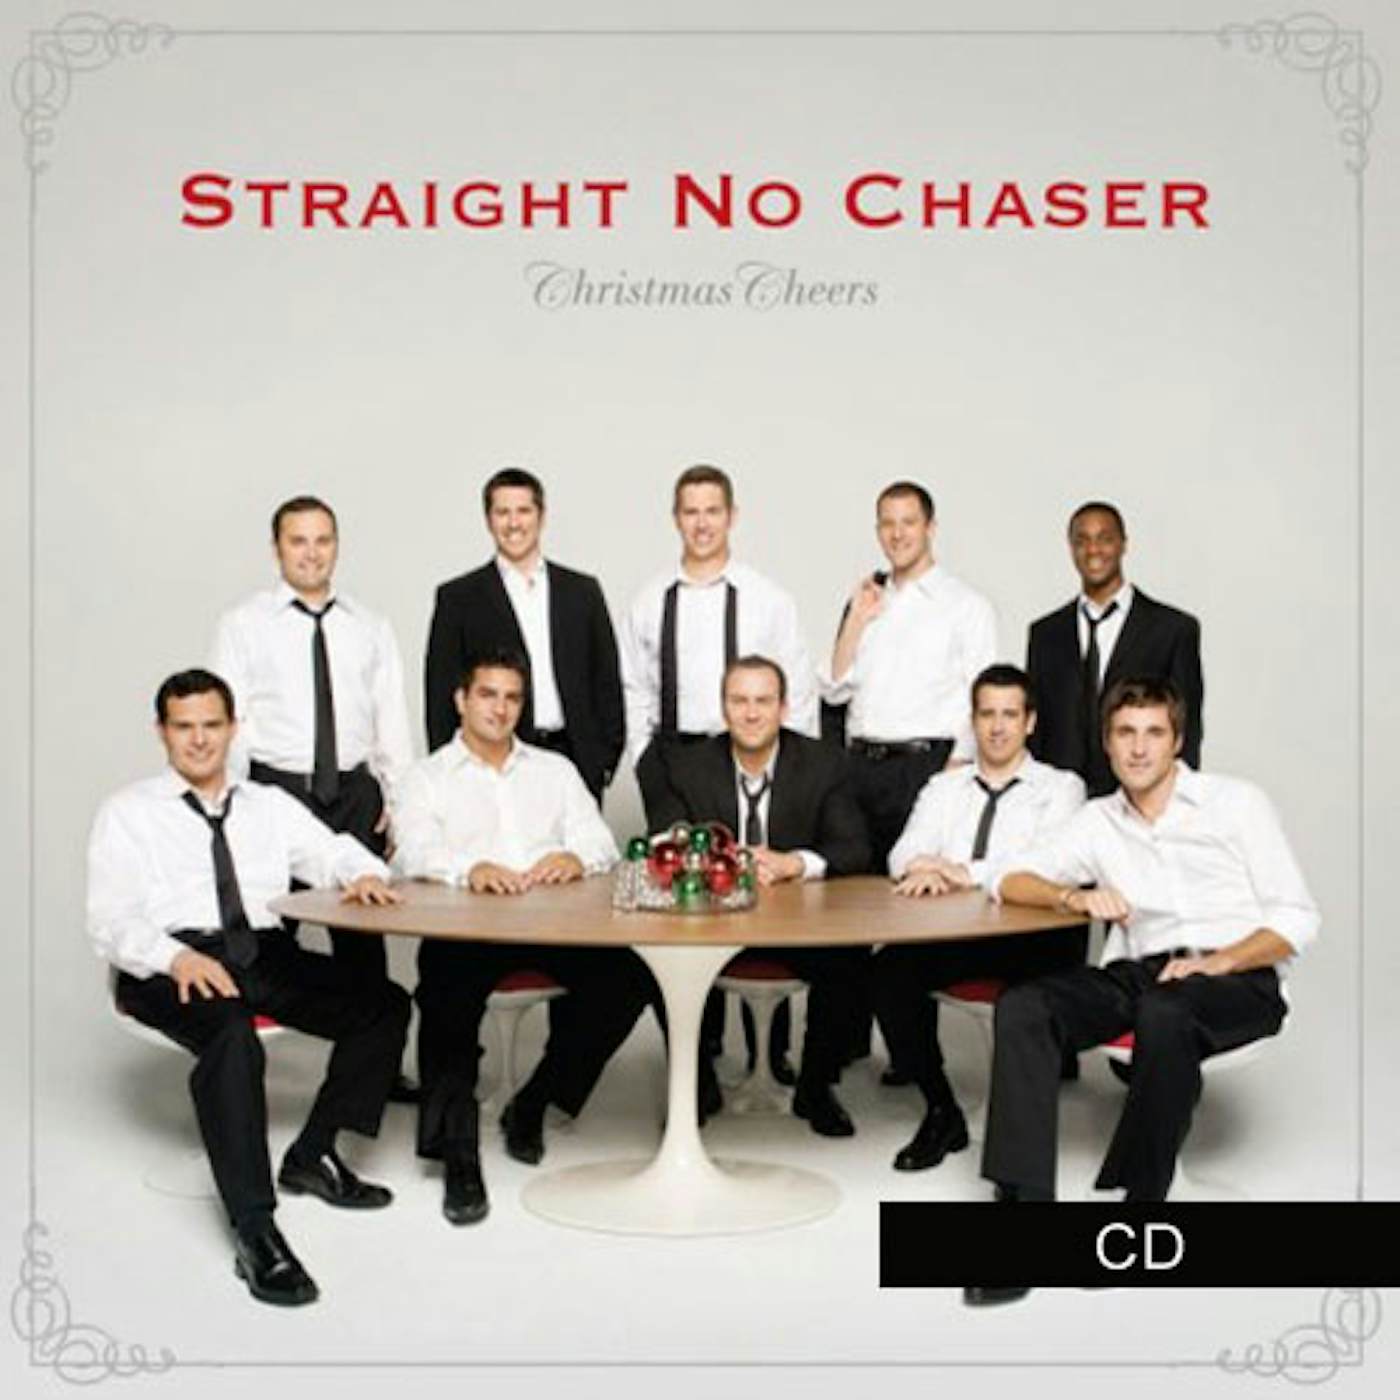 Straight No Chaser Christmas Cheers CD